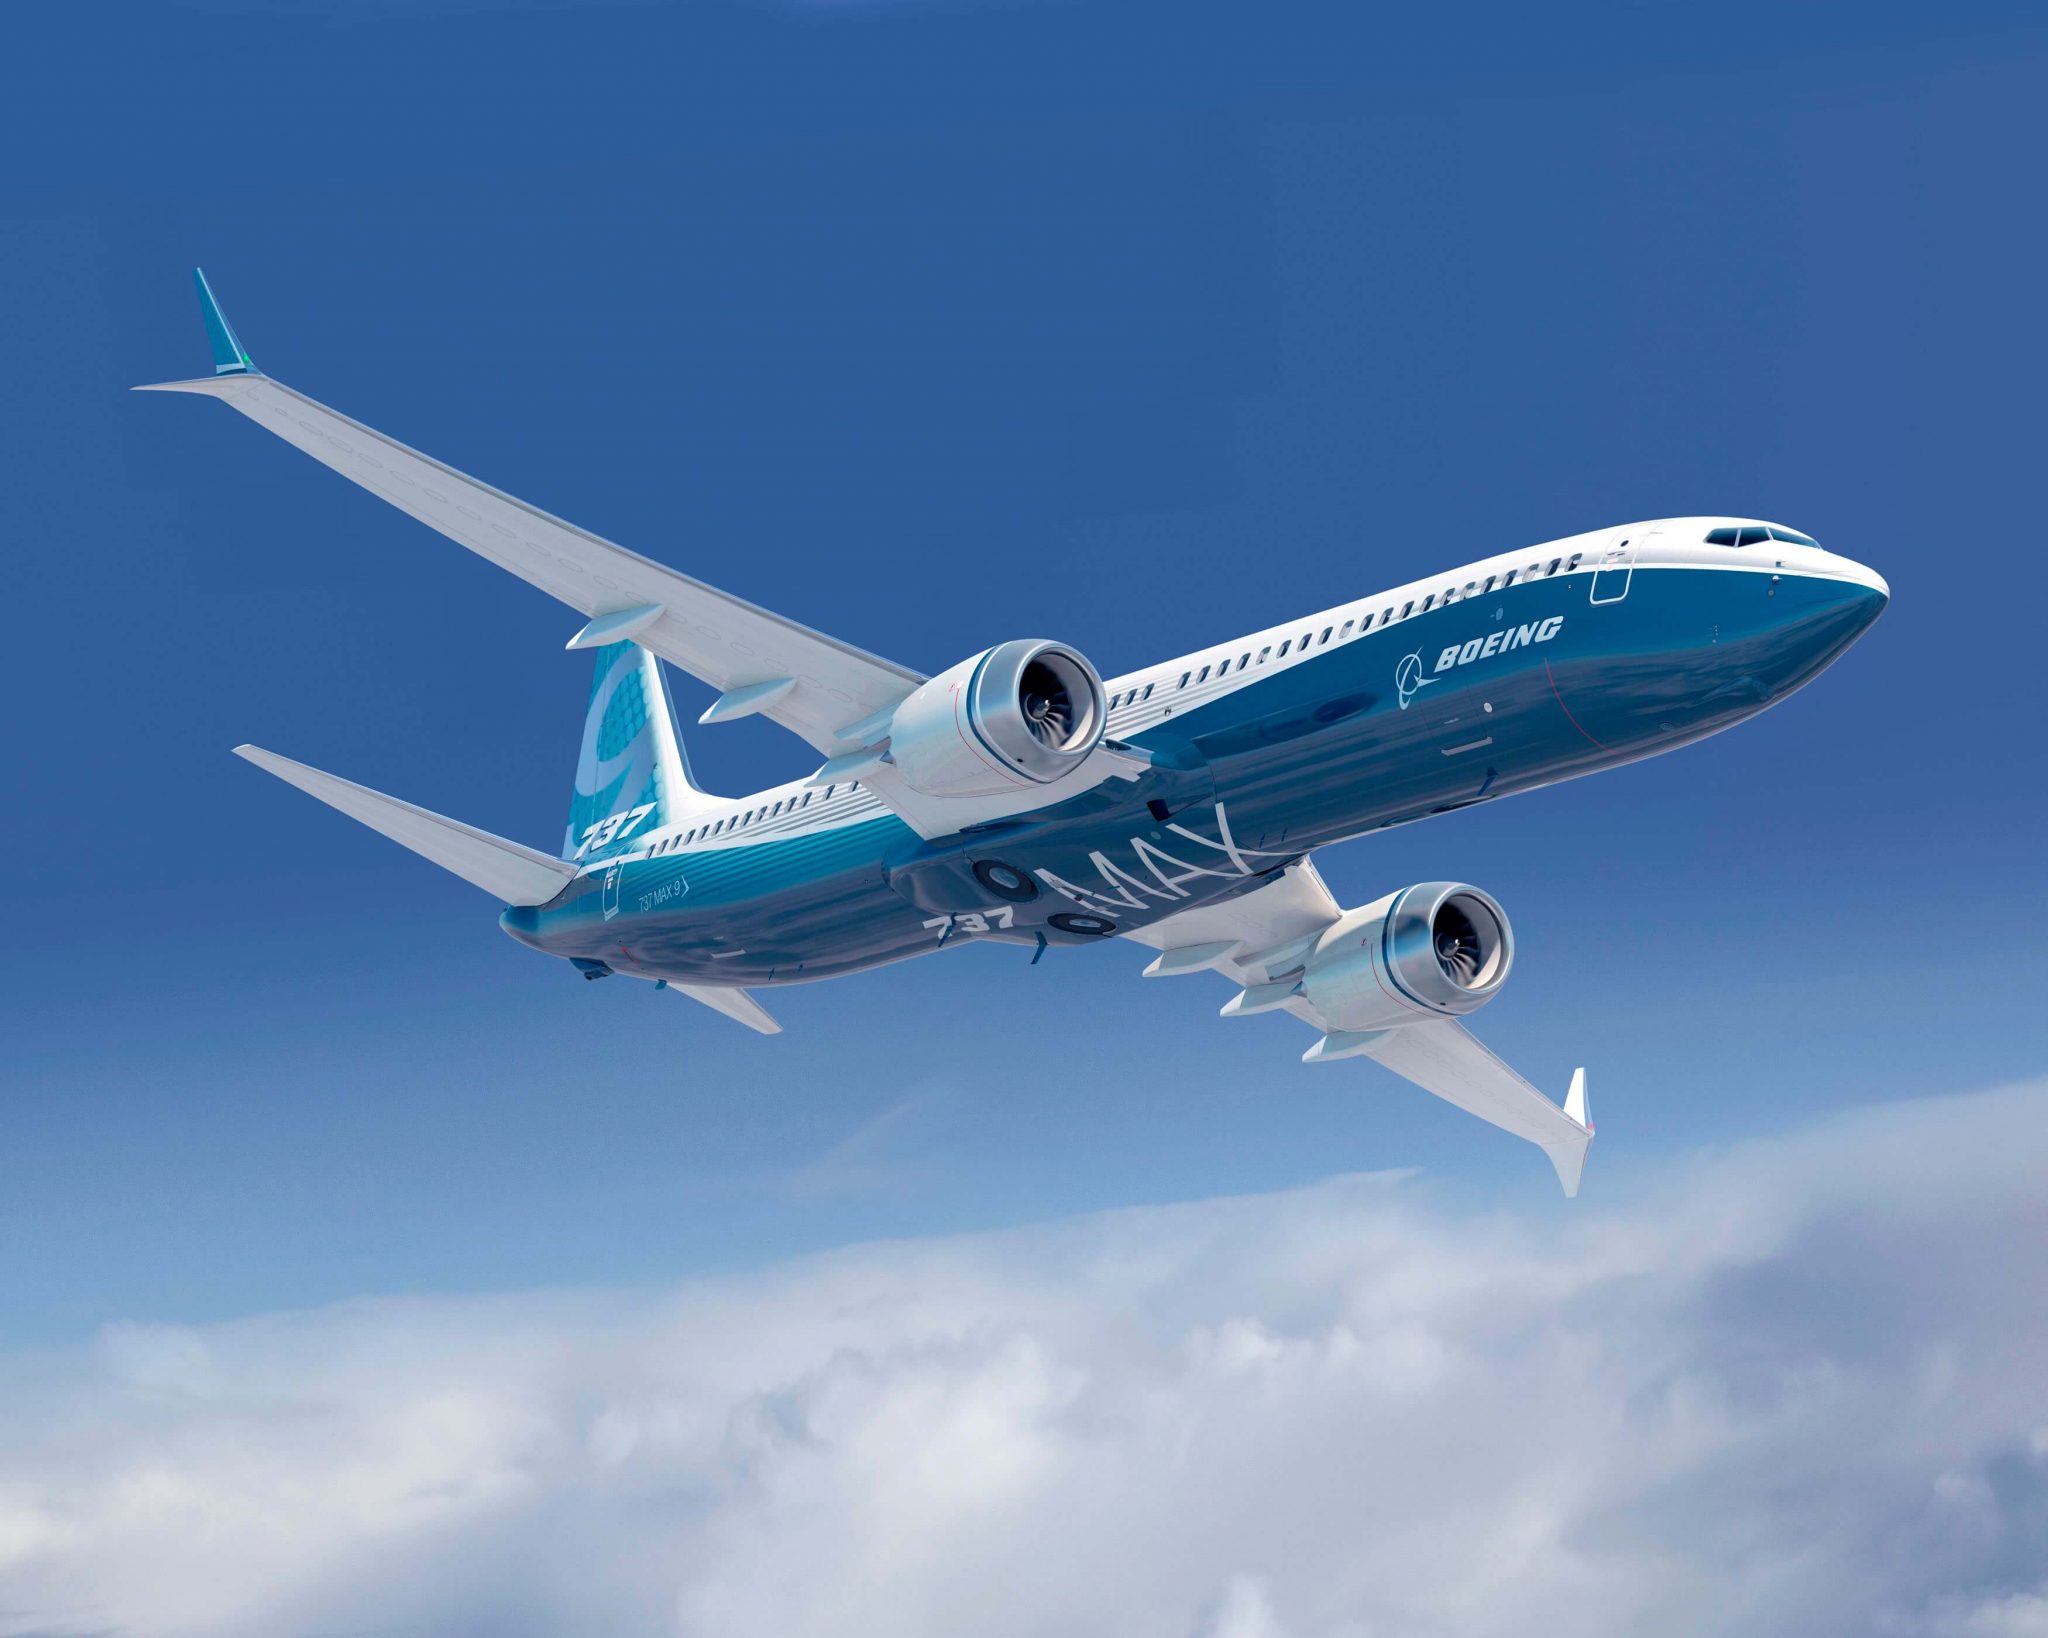 Tata Boeing Aerospace ships first vertical fin structure for 737 from India